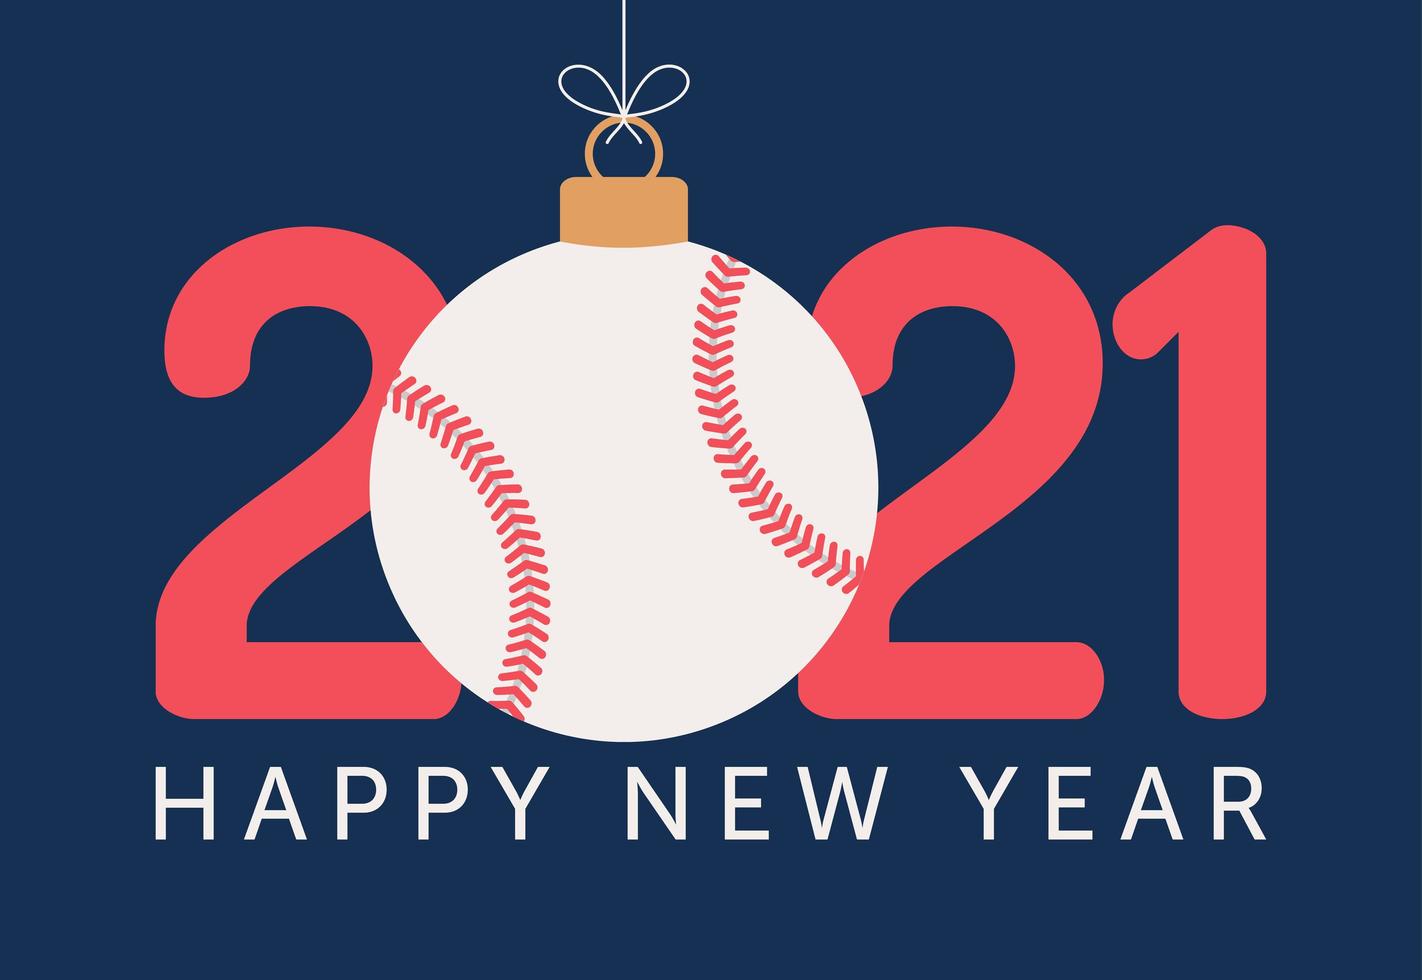 2021 Happy New Year typography with baseball ornament vector